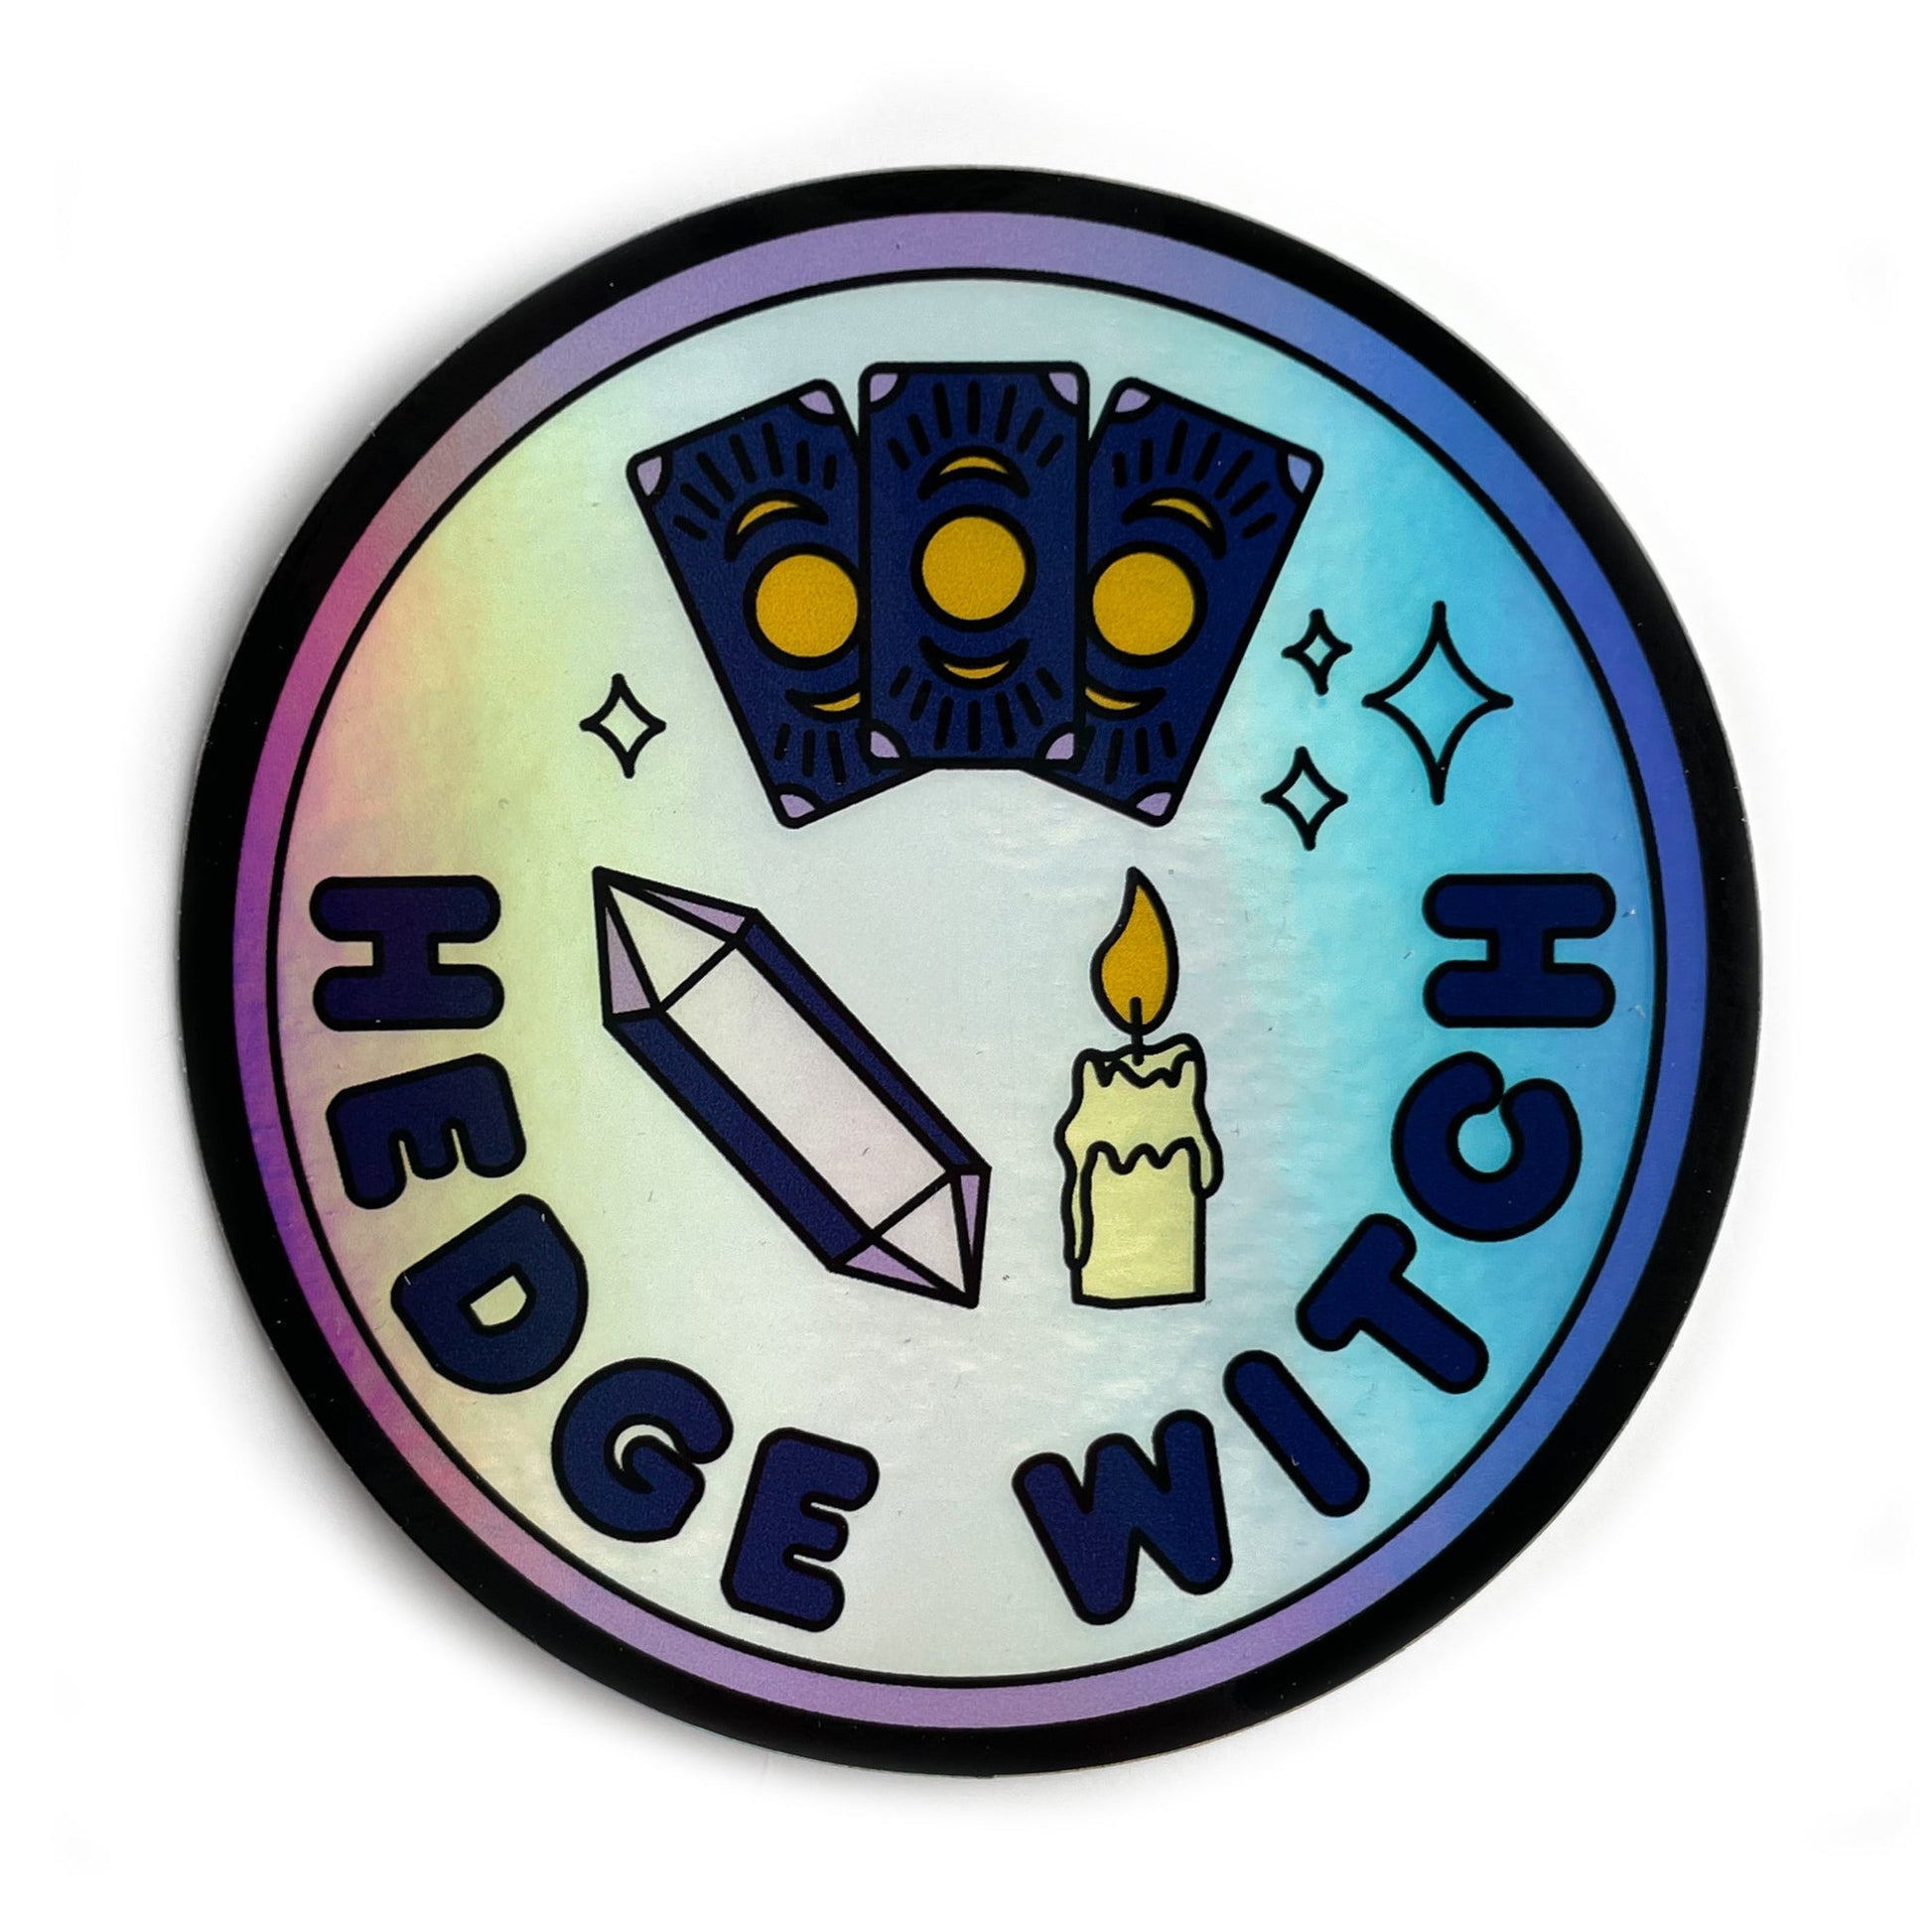 A circular holographic sticker with a purple border and words that read "Hedge Witch". It has an amethyst crystal, a candle, and tarot cards depicted on it. 